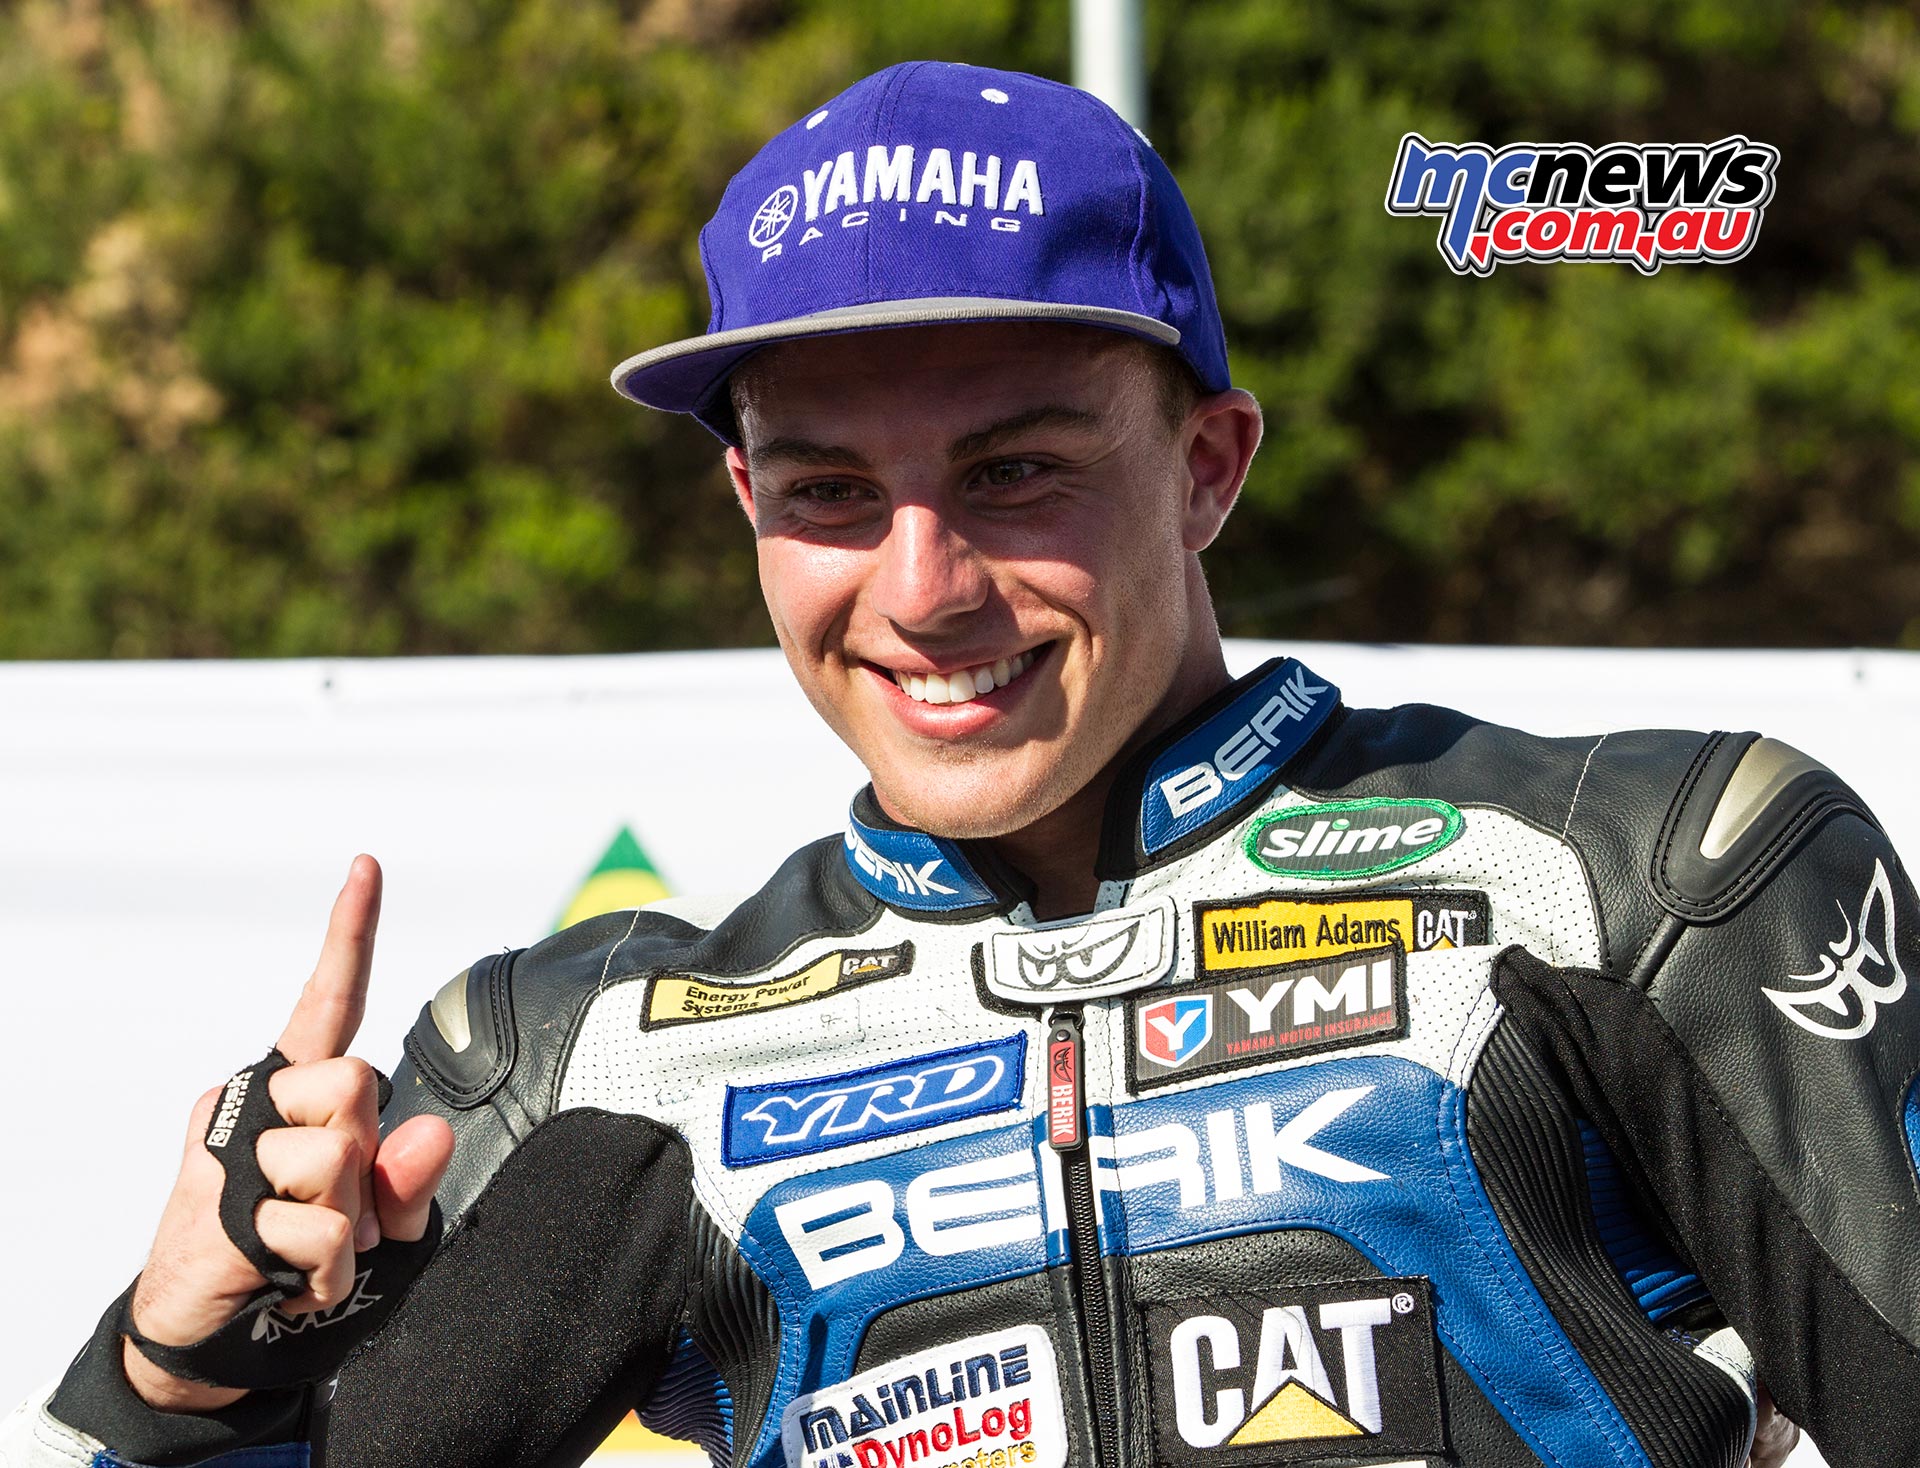 Daniel Falzon was all smiles in Parc Ferme after wrapping up a perfect result at the Phillip Island ASBK season opener in 2017 - Image by Oliver Ward